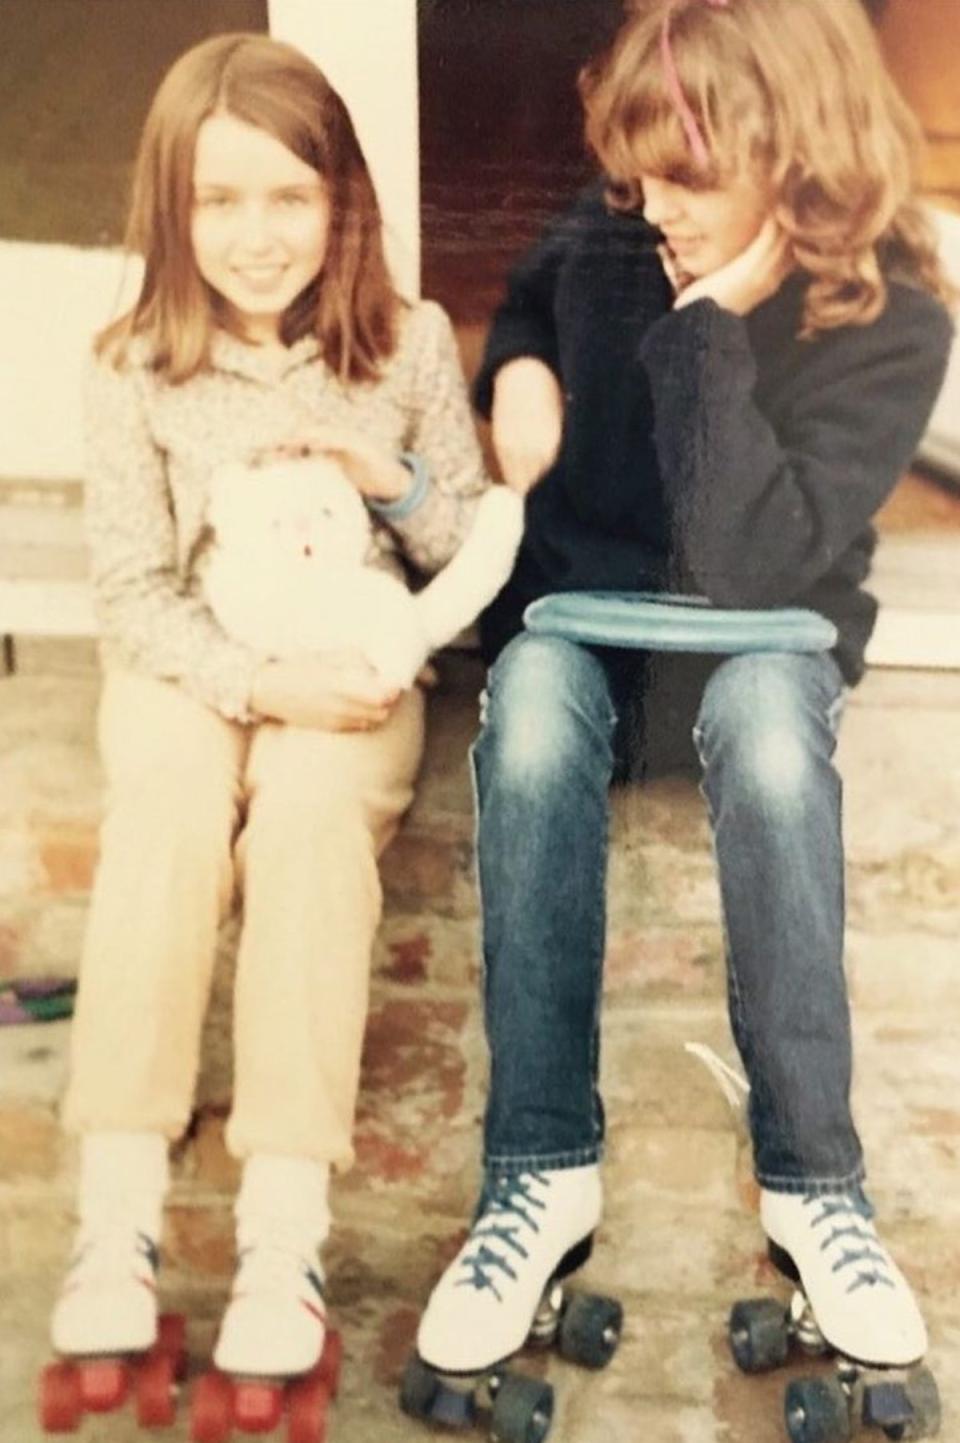 Kylie, pictured with sister Dannii during their childhood in Australia, has resided in the UK for 30 years (Kylie Minogue/Instagram)